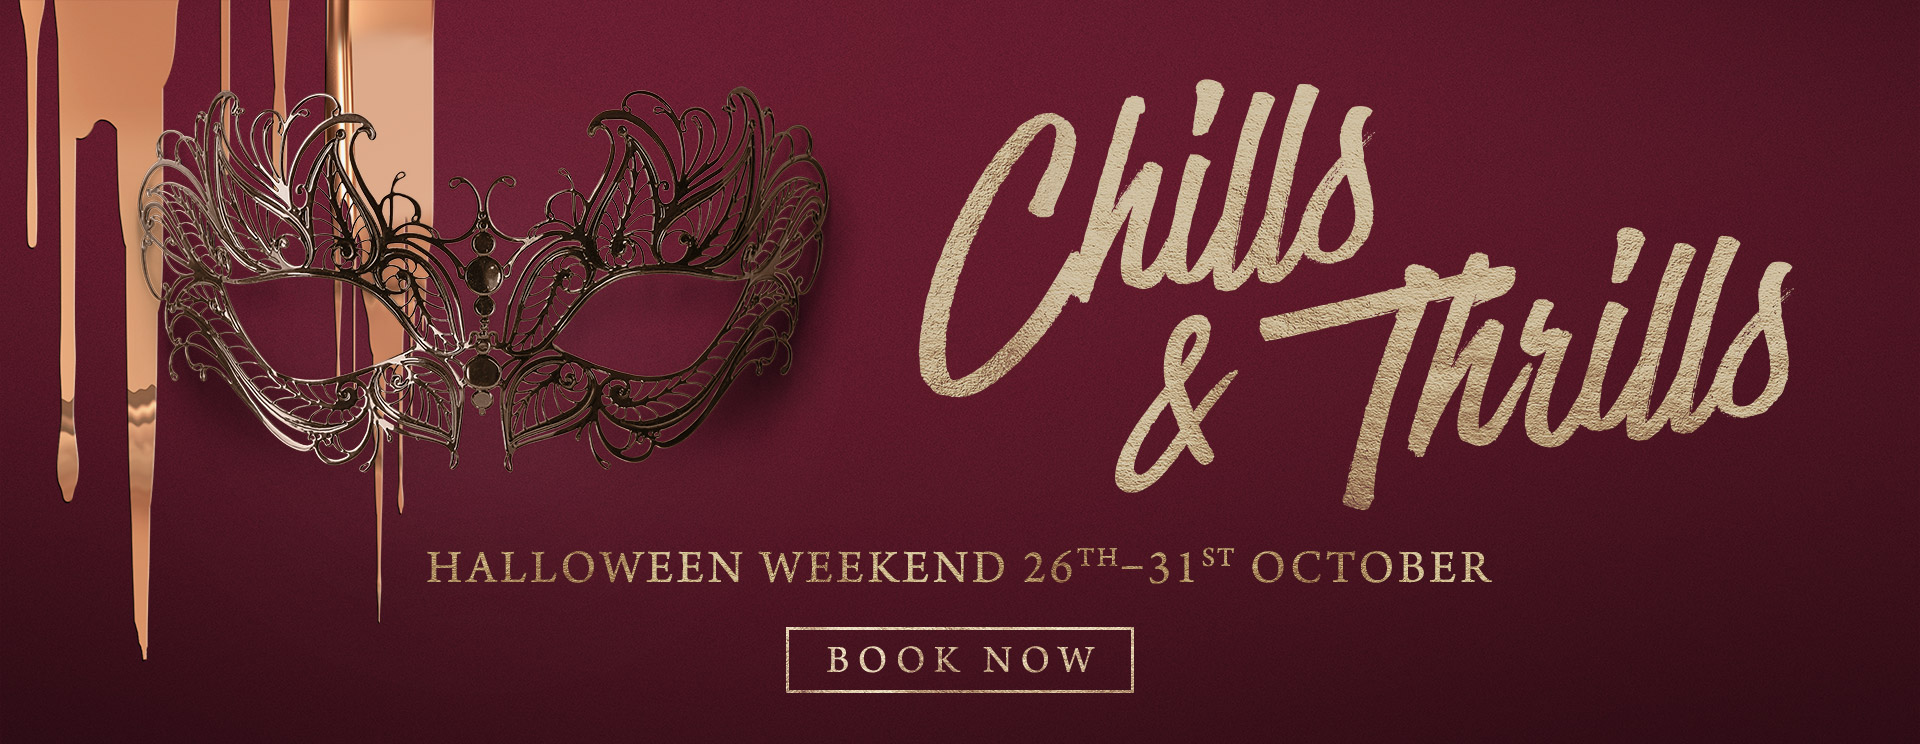 Chills & Thrills this Halloween at The Oatlands Chaser